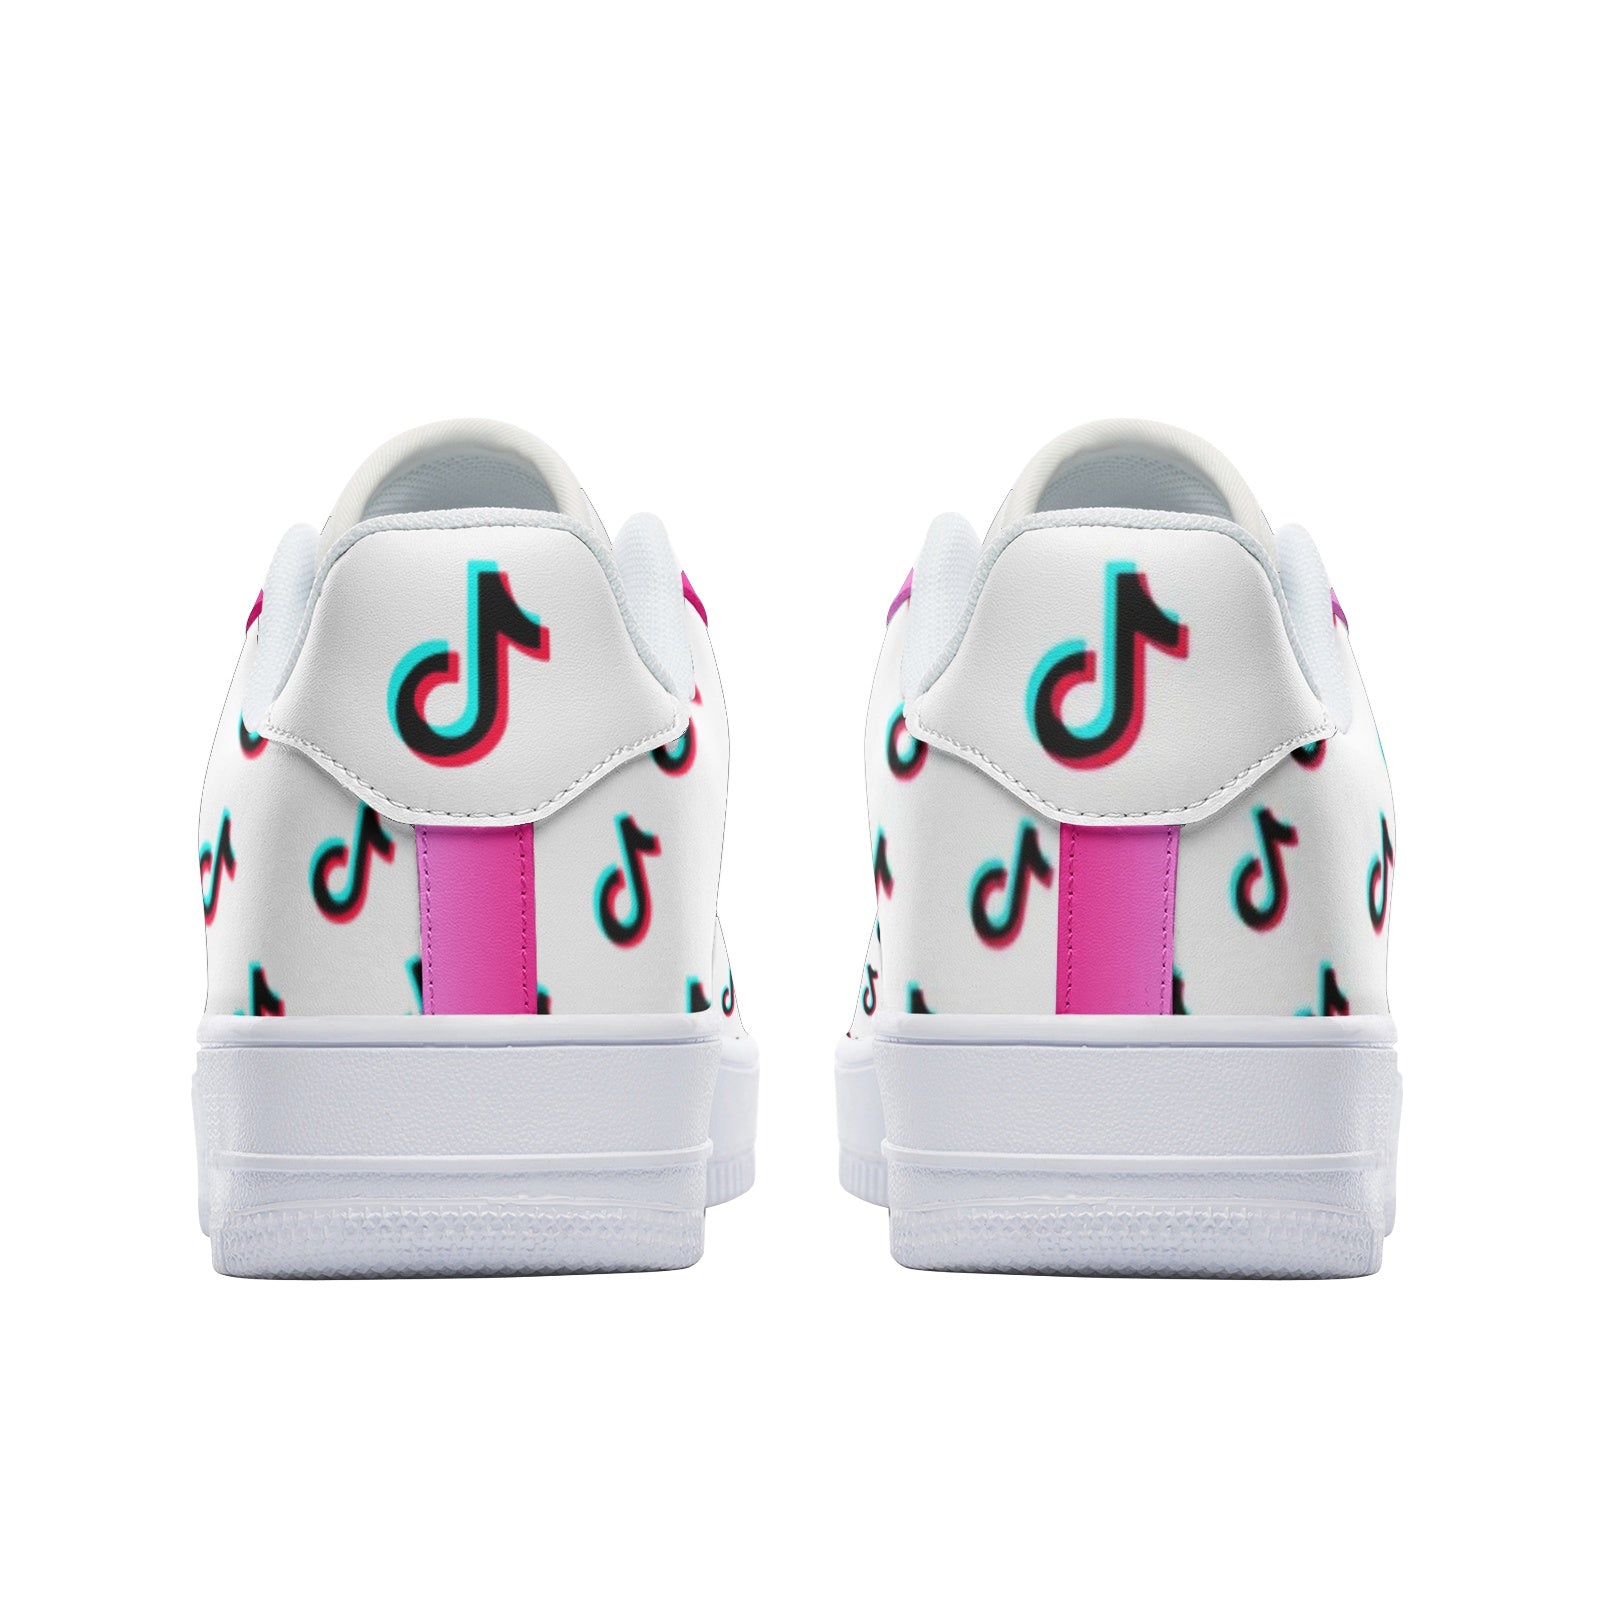 TikTok Unisex Low Top Leather Sneakers - Pink - SD-style-shop